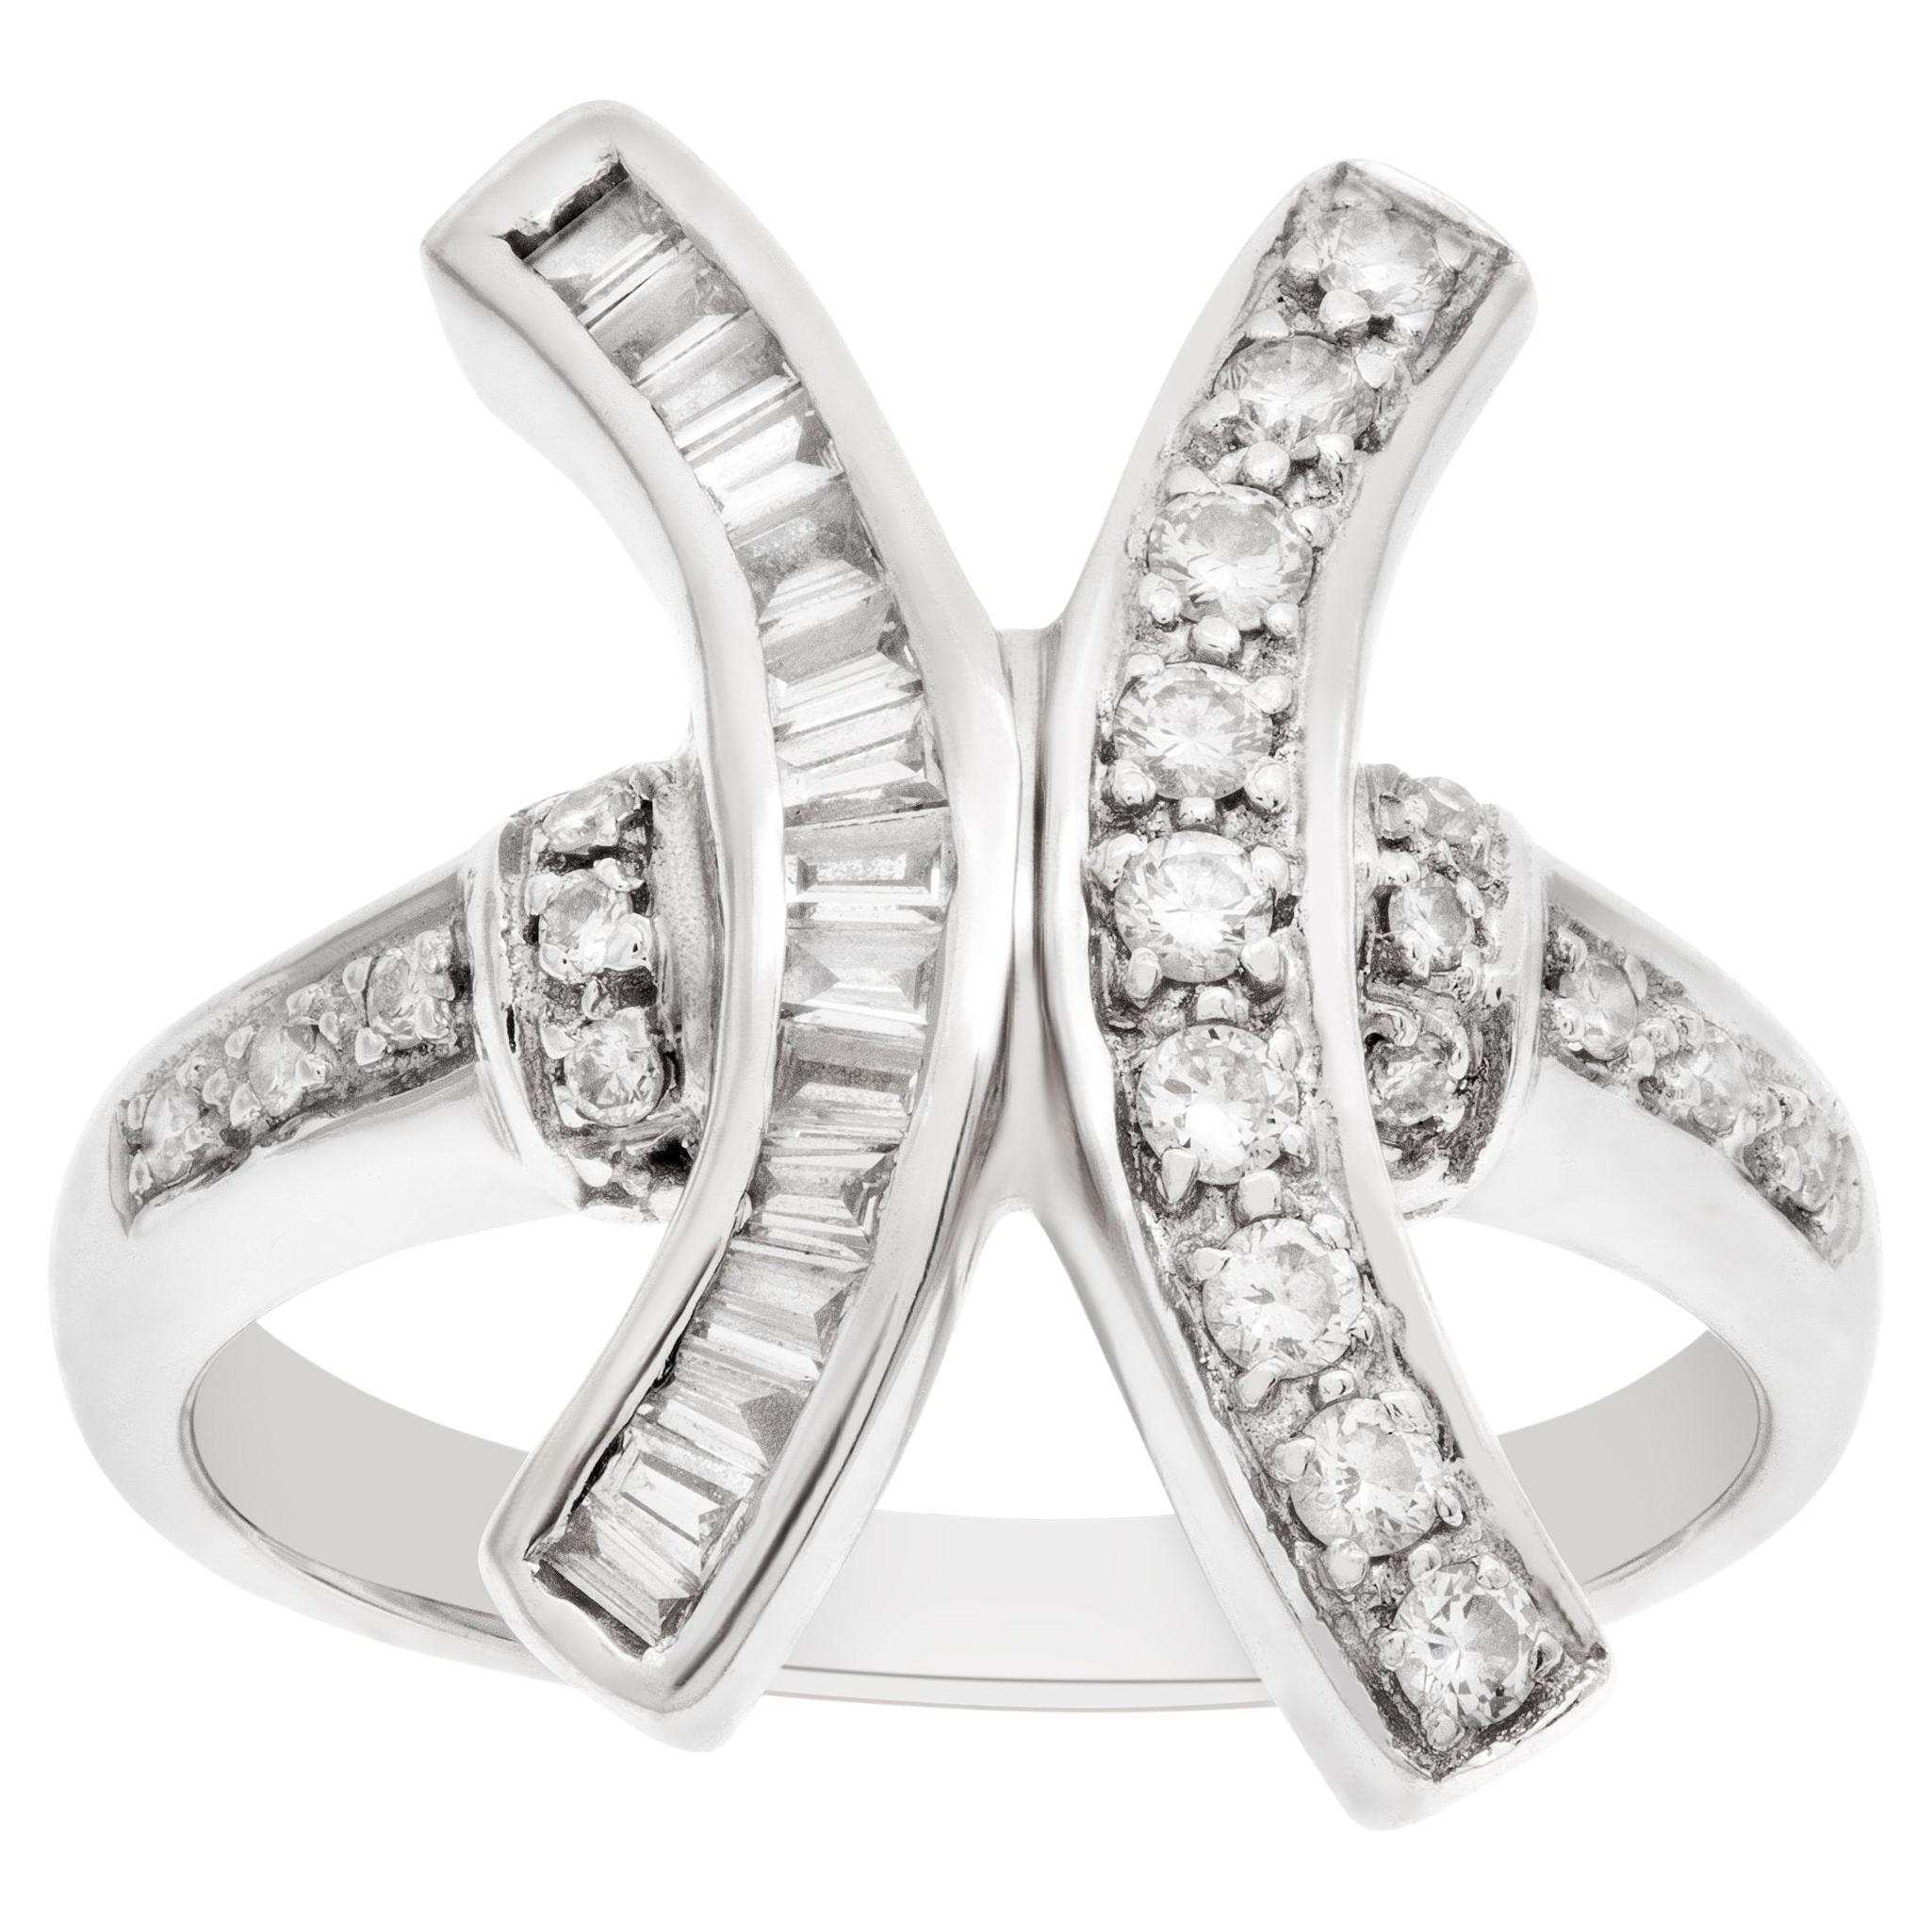 "X" Shaped Diamond Ring in 18k White Gold. 0.30 Carats in Diamonds